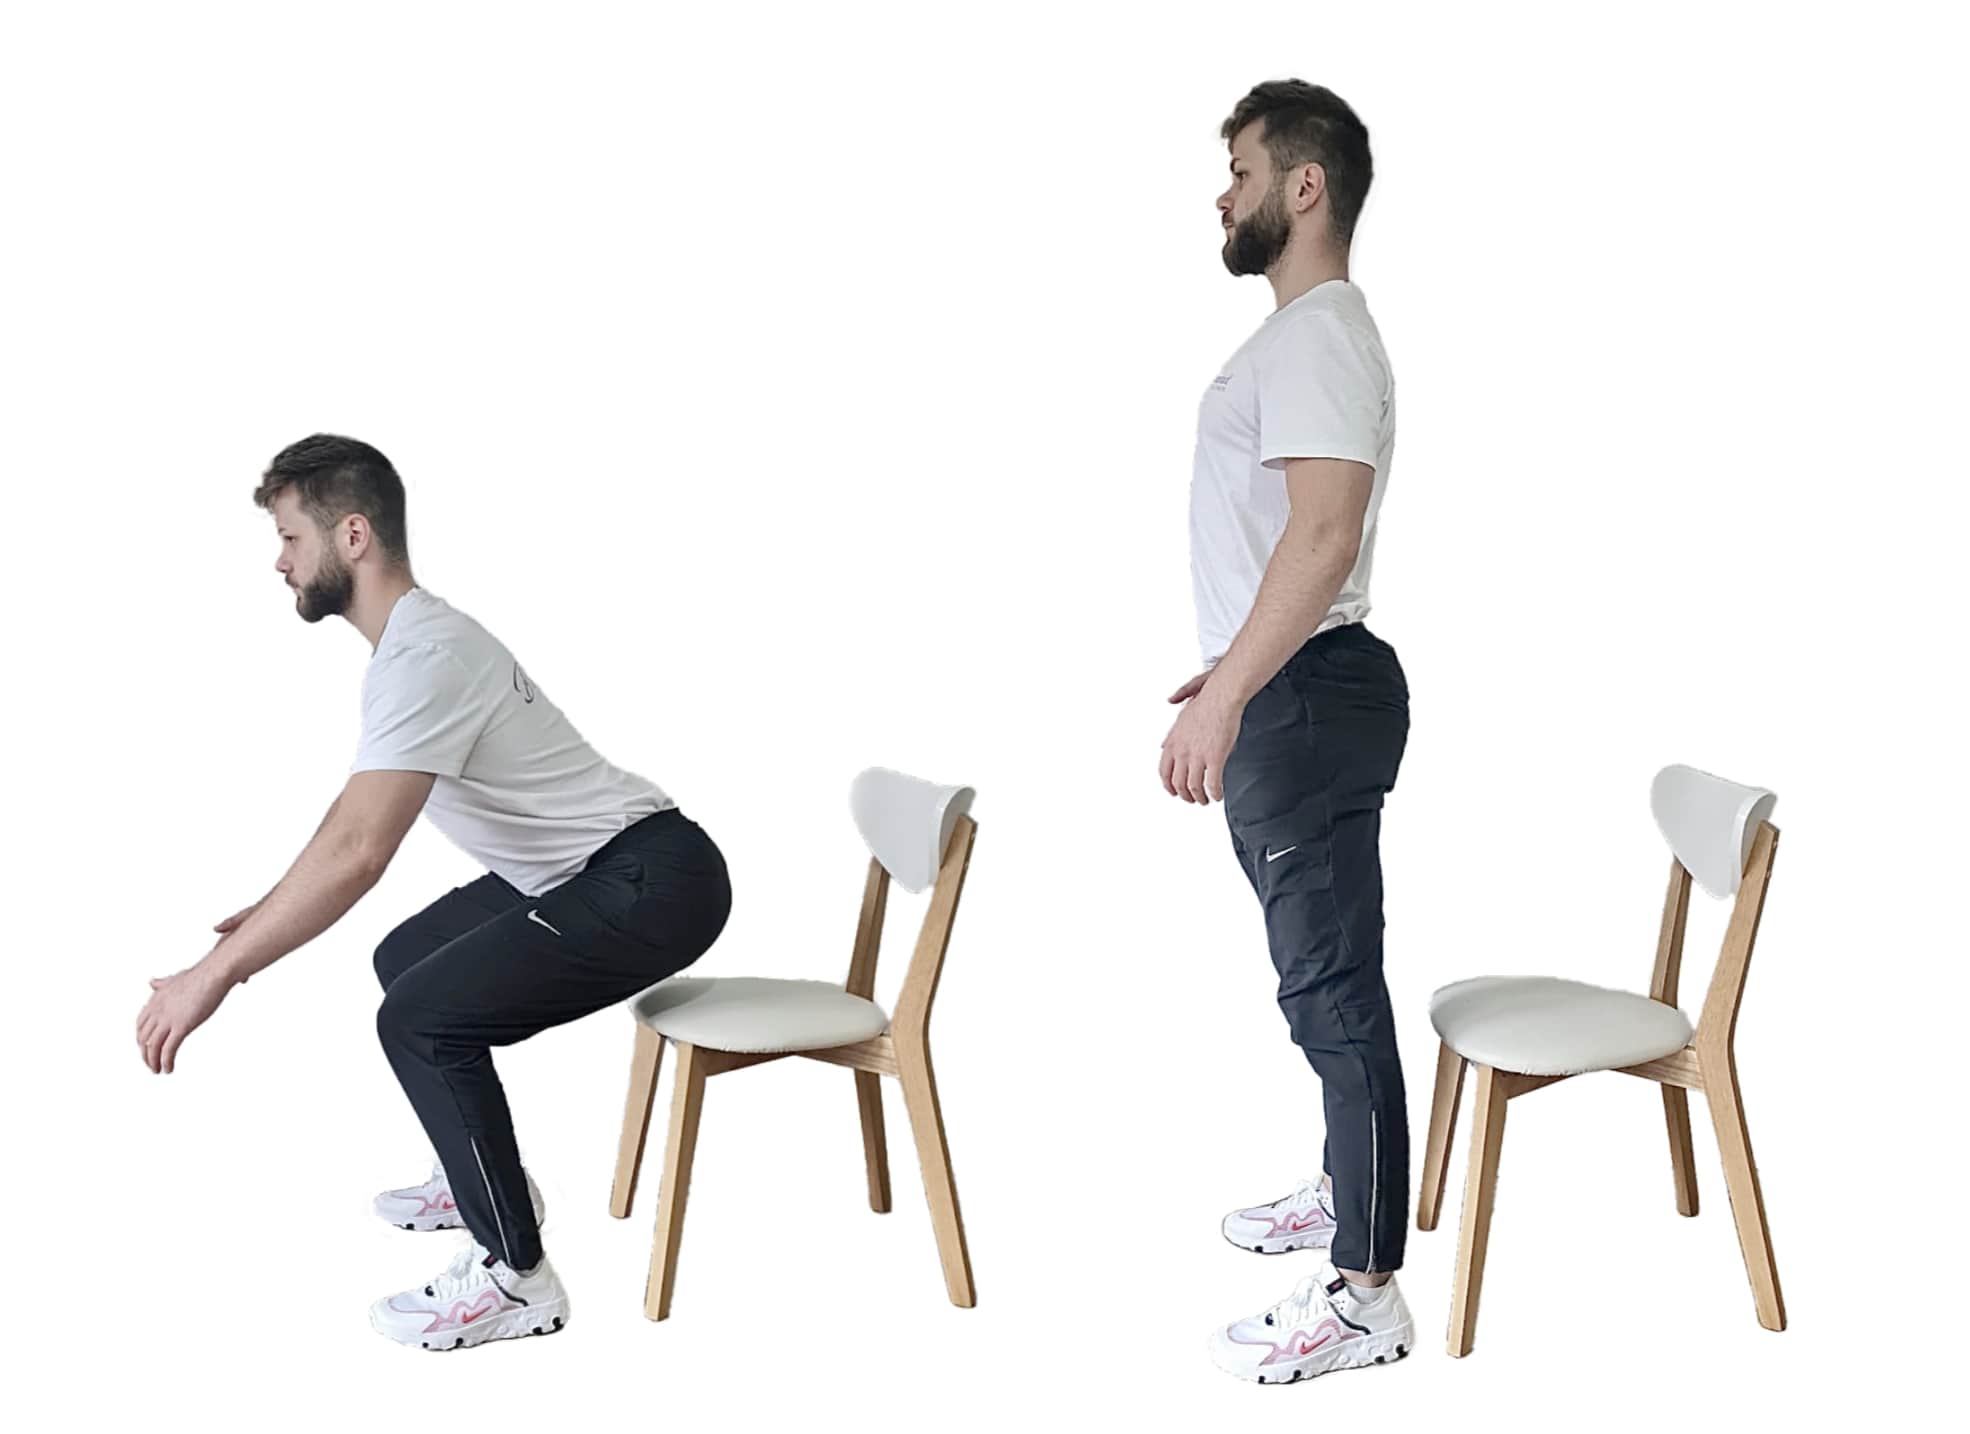 Man demonstrating squat exercise onto chair